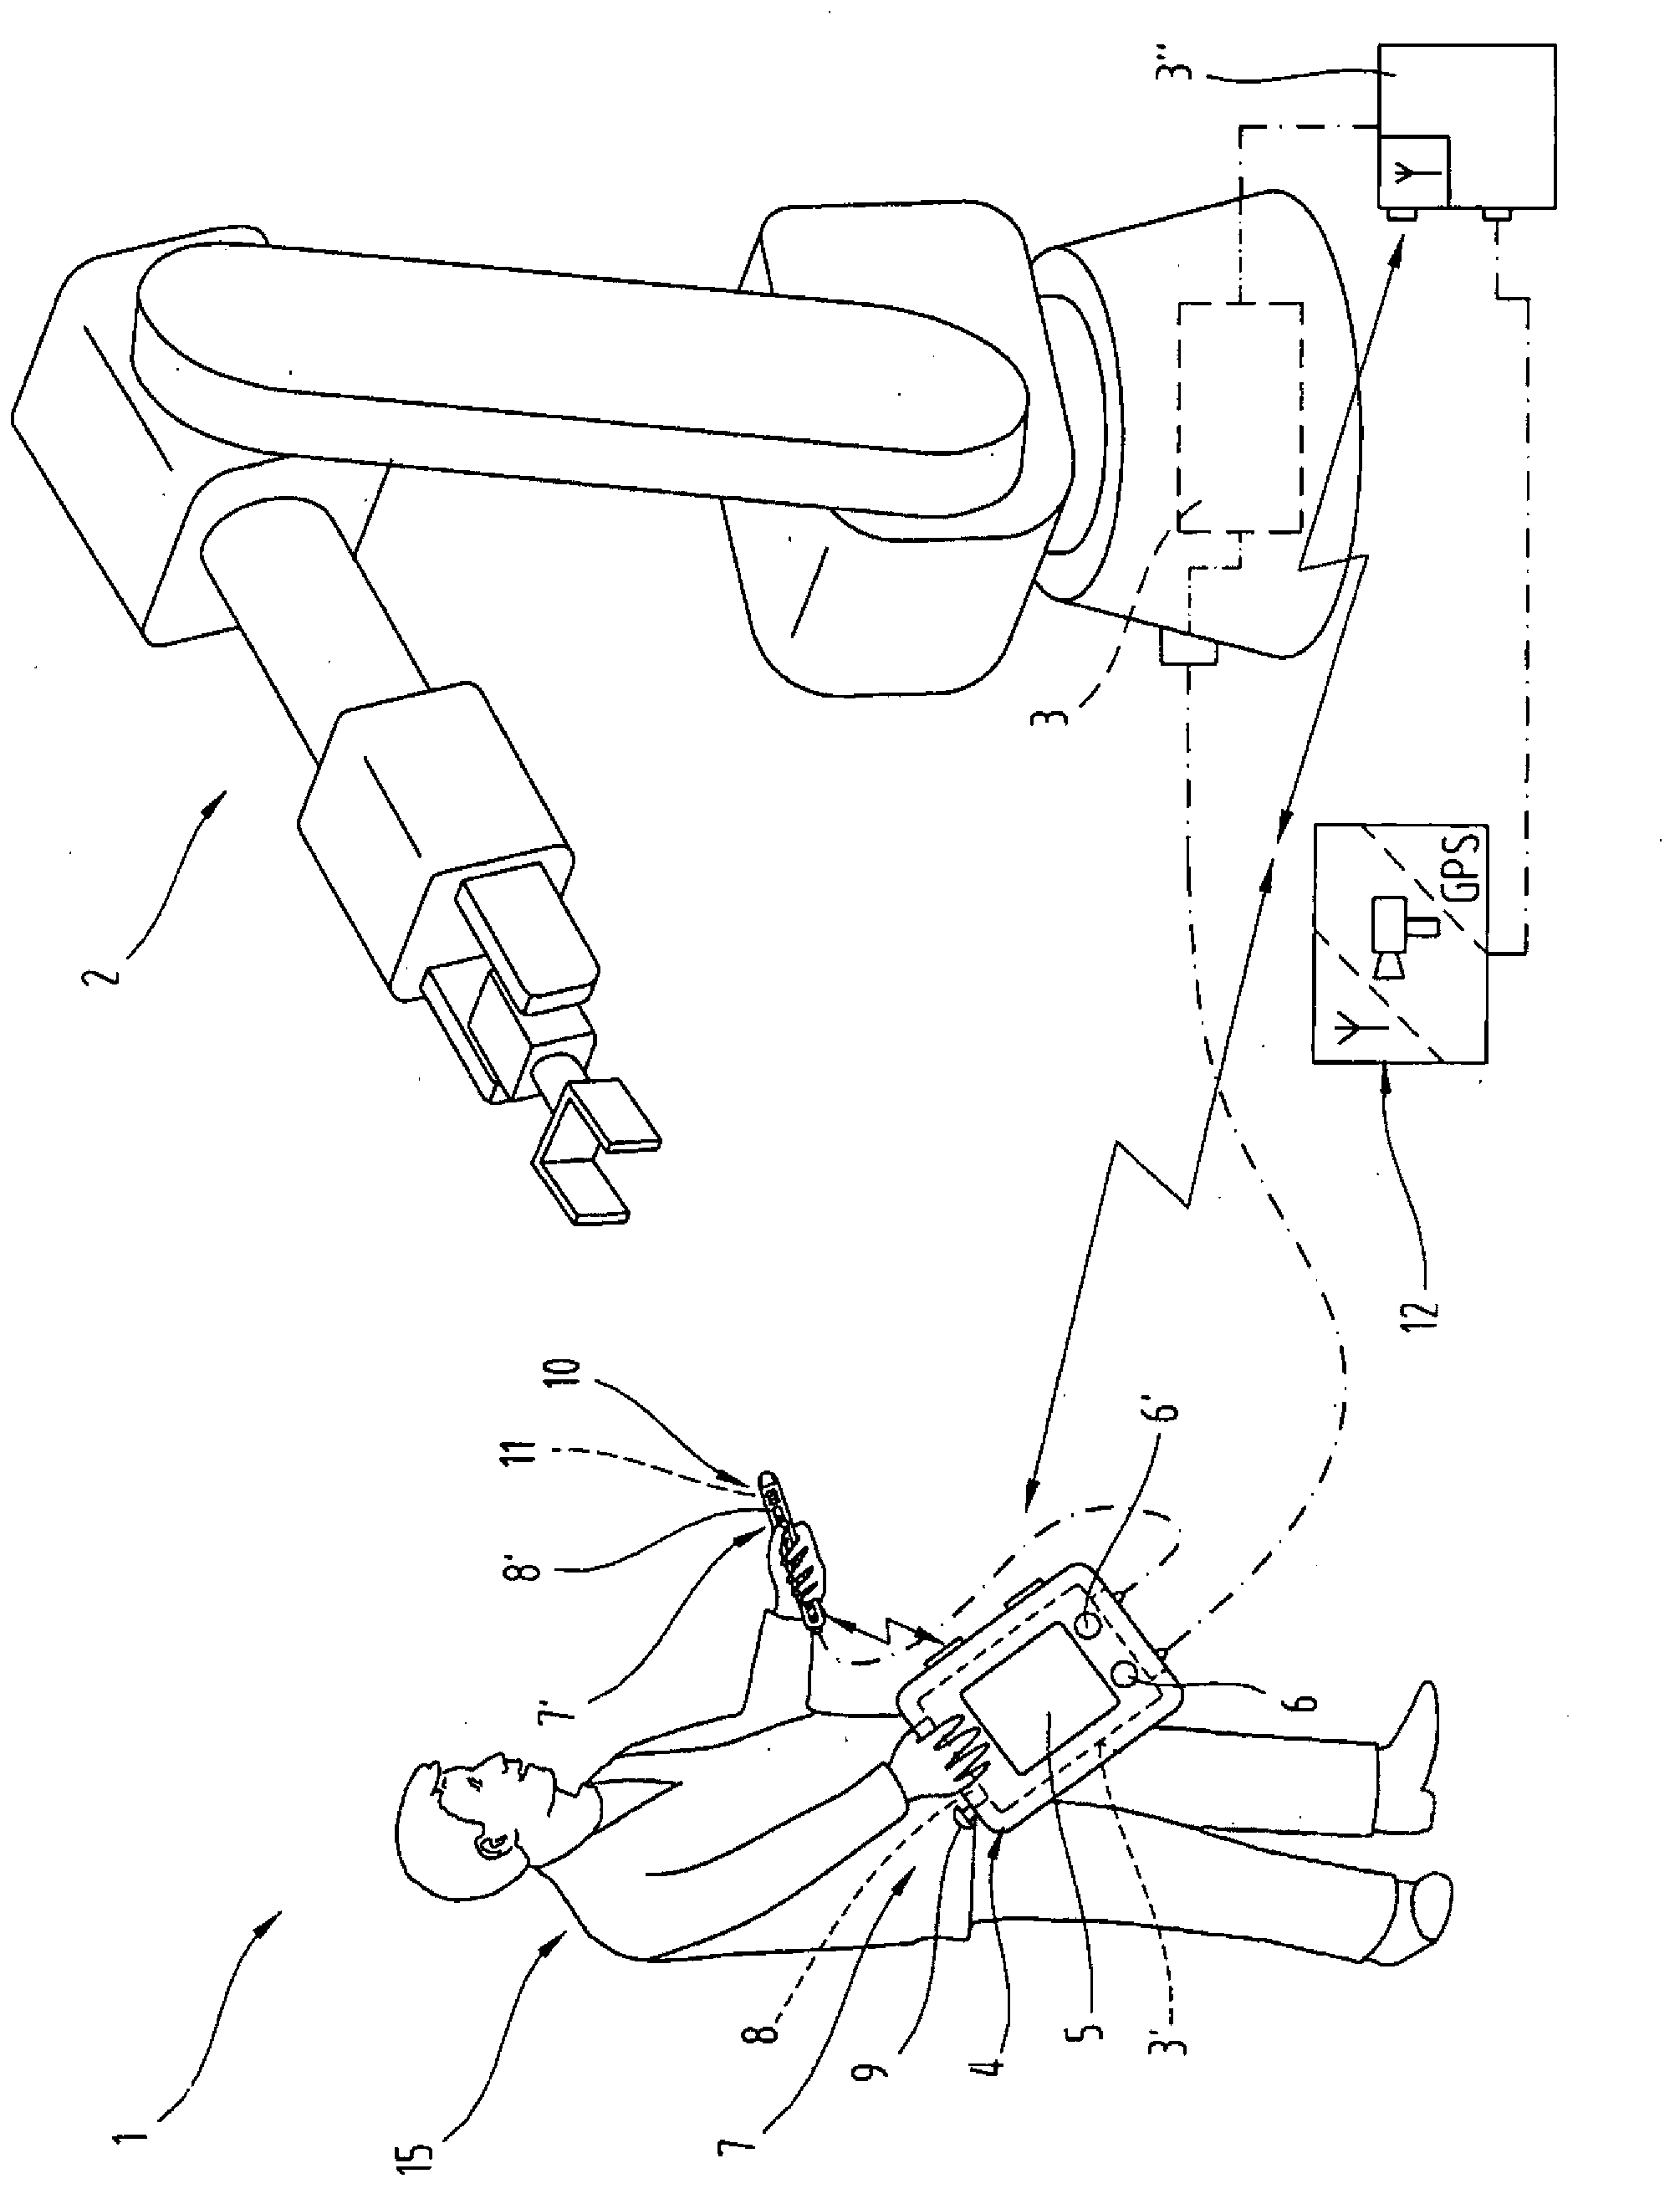 Method for programming or setting movements or sequences of industrial robot